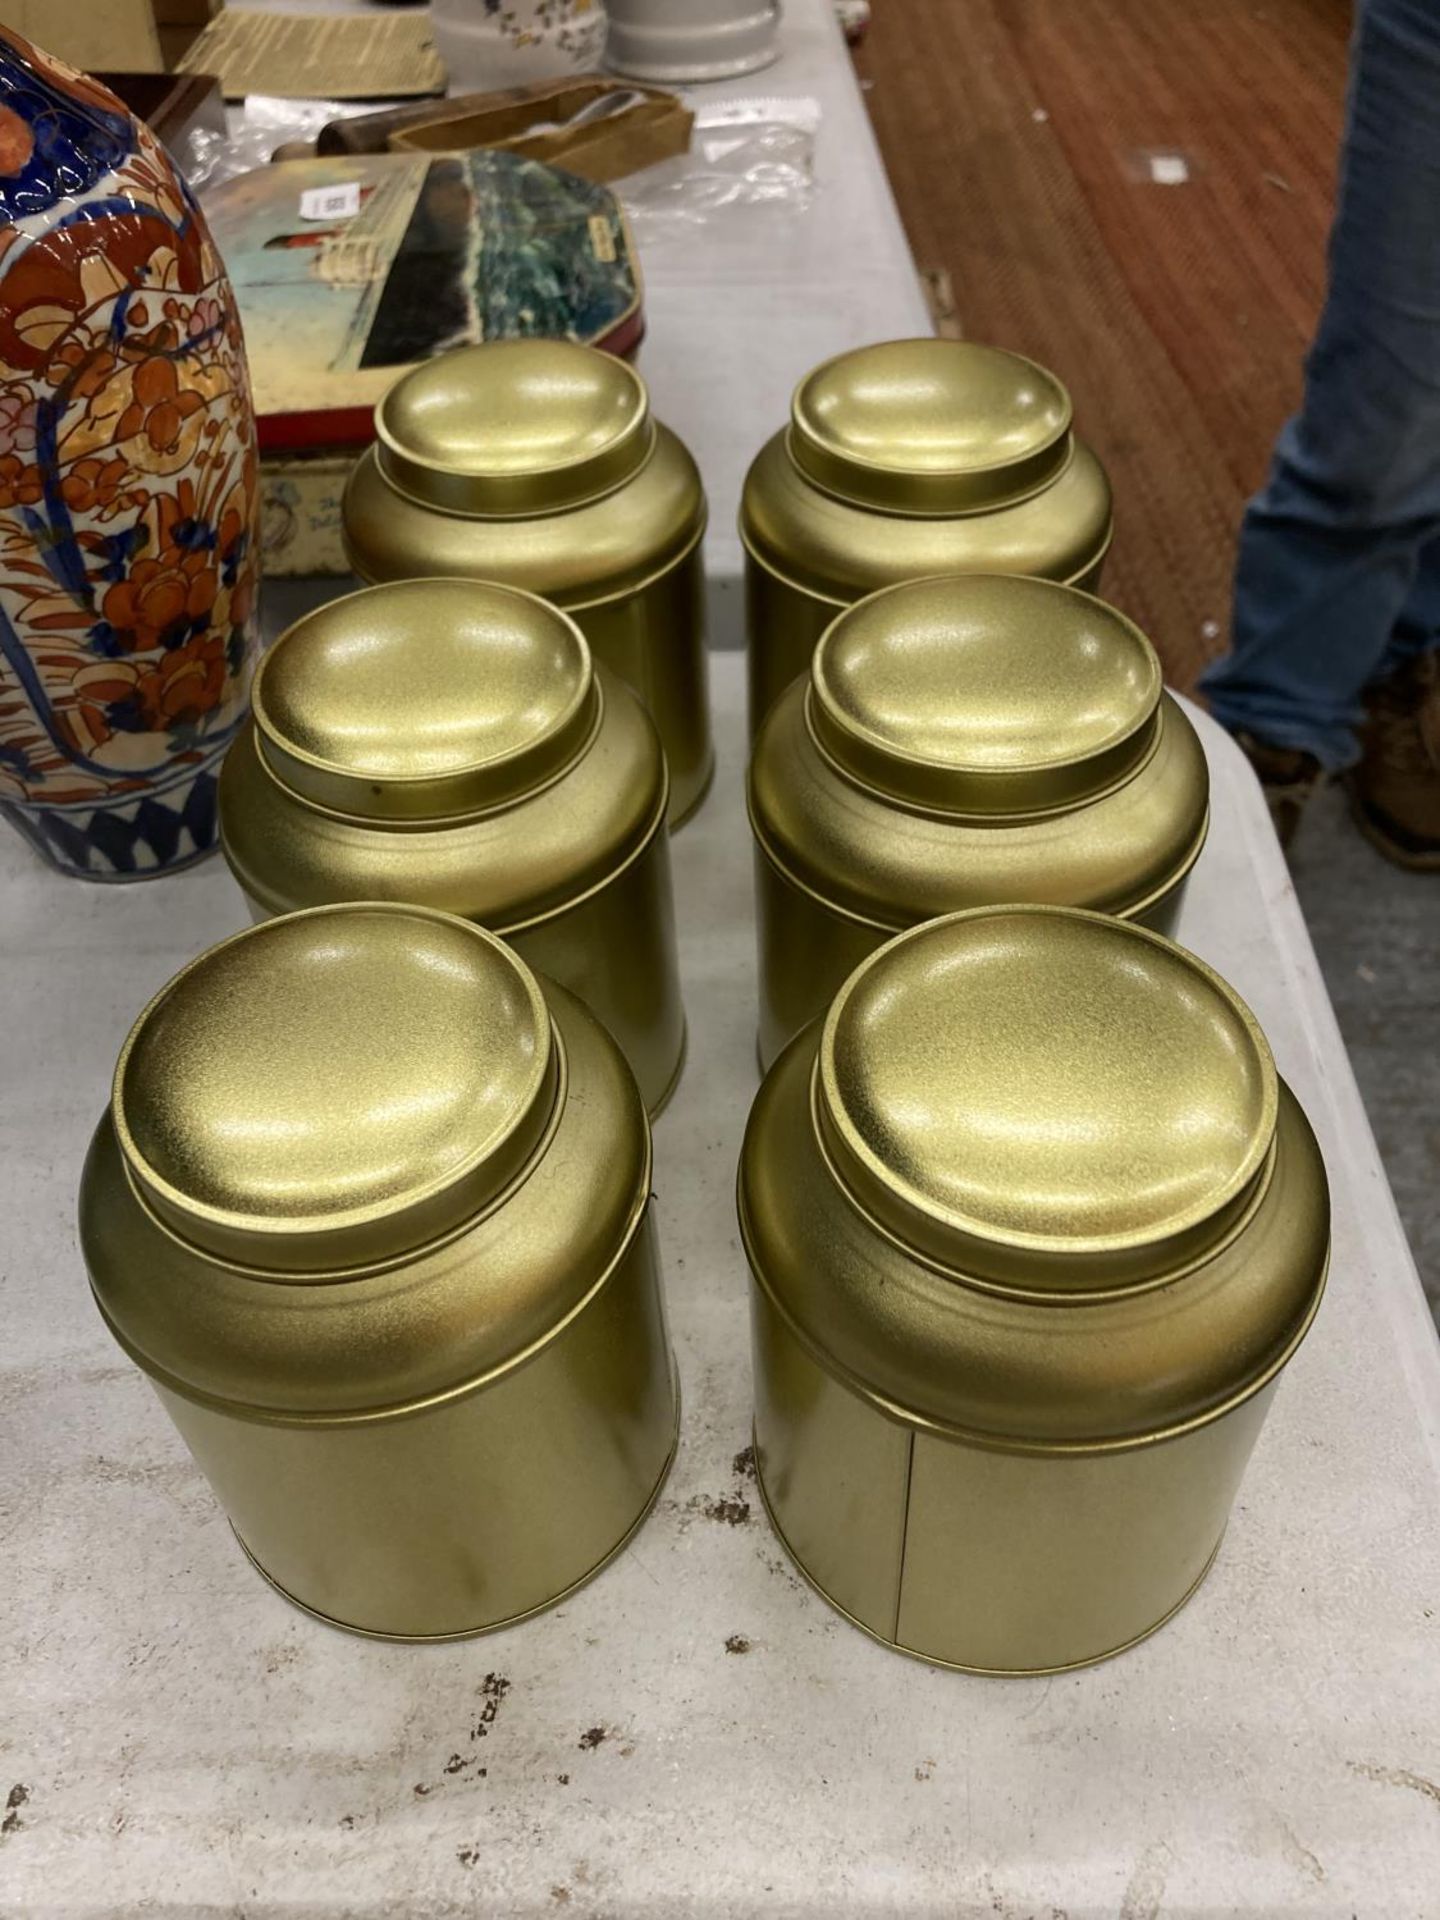 SIX GOLD COLOURED TEA CADDIES, ONE CONTAINING 'TEA FROM THE MANOR' CHRISTMAS BLEND TEABAGS